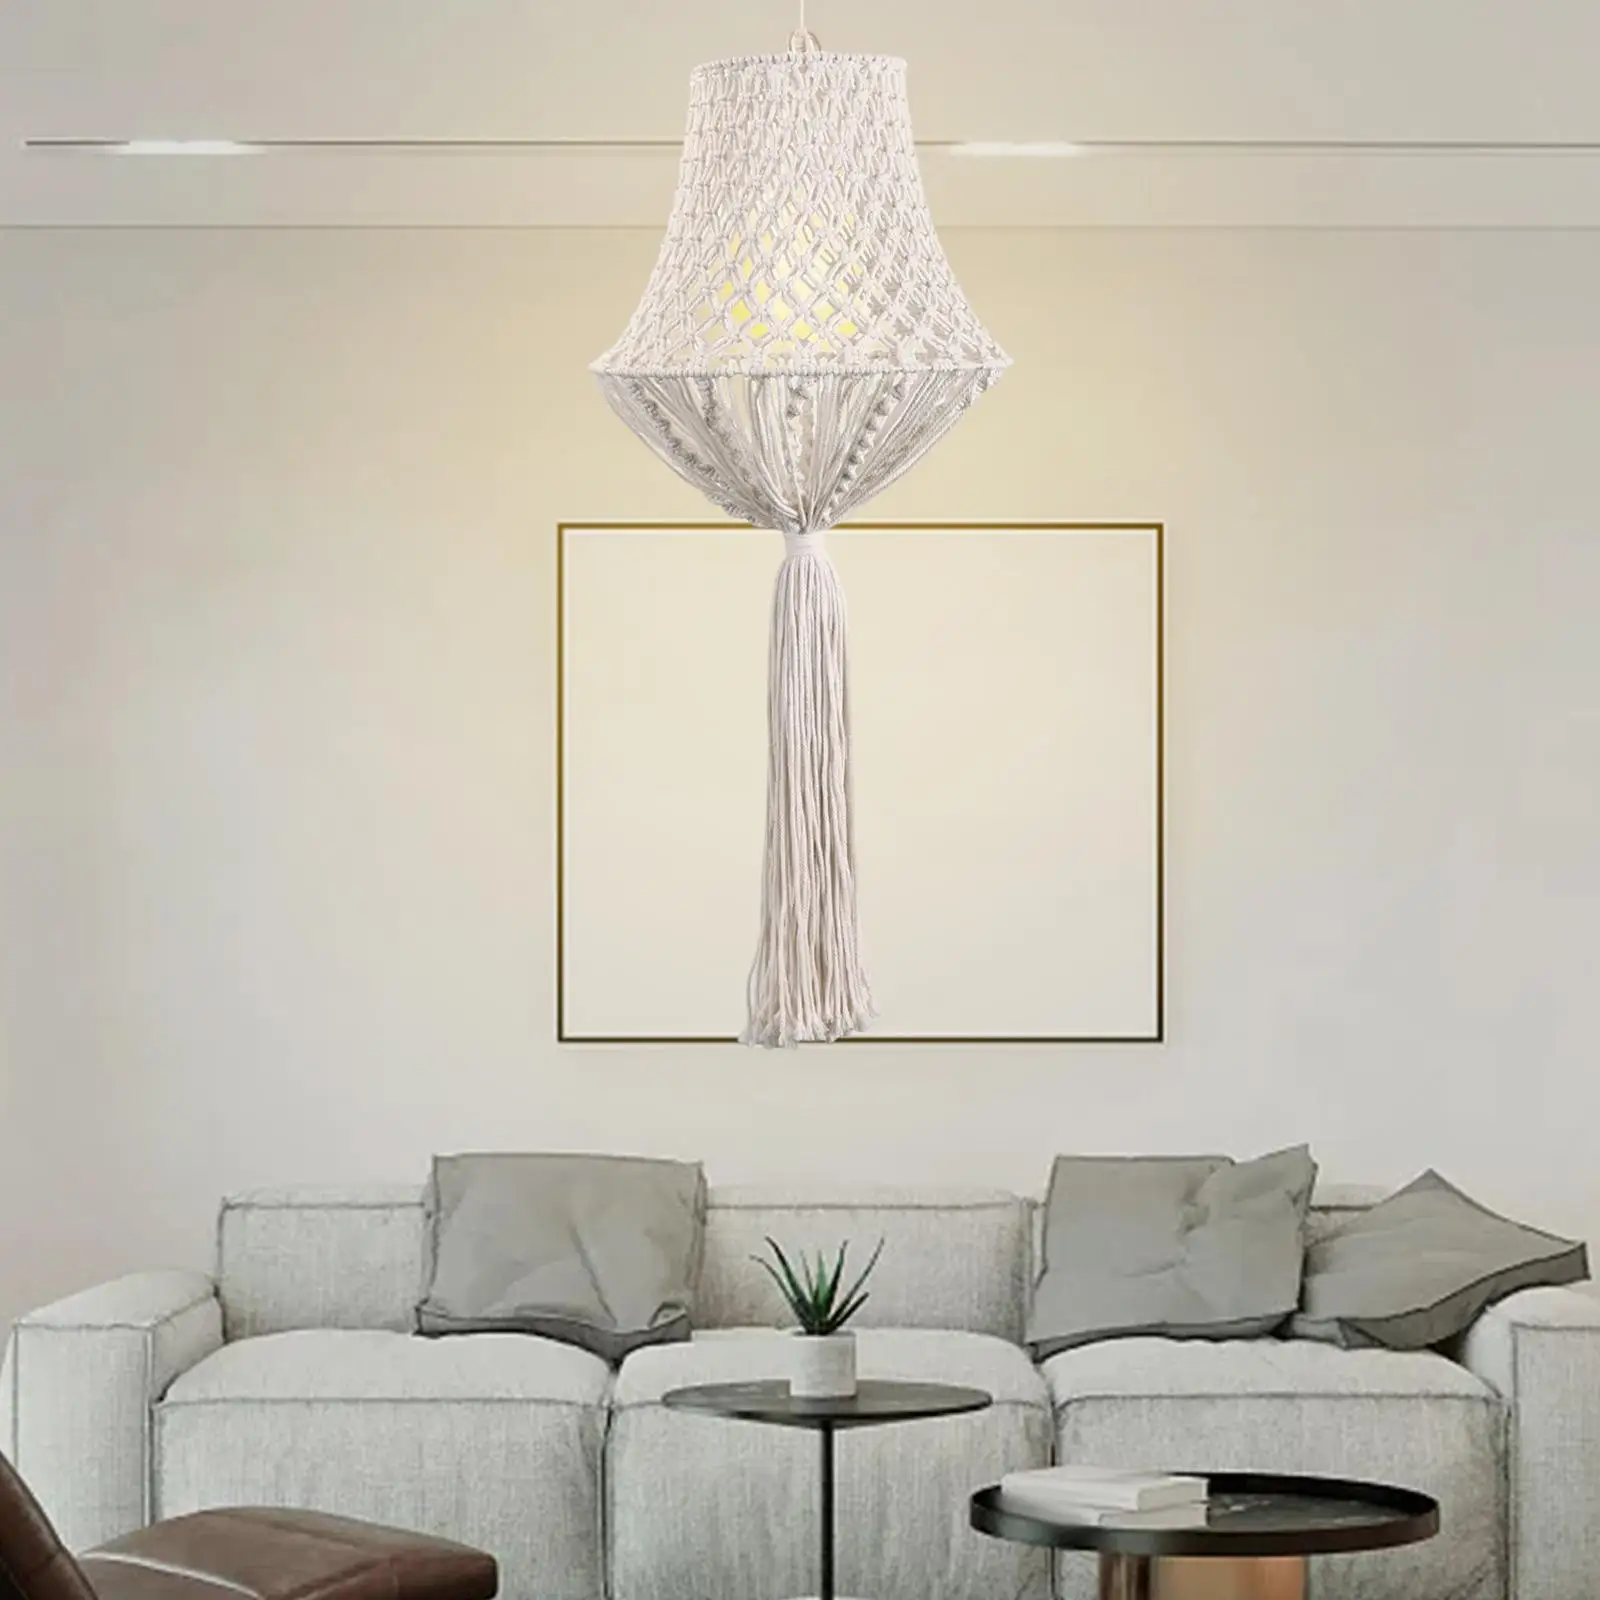 Macrame Lamp Shade Handwoven Ceiling Light Shade Fitting Hanging Pendant Lamp Cover Chandelier Lampshade for Cafe Home Ornament